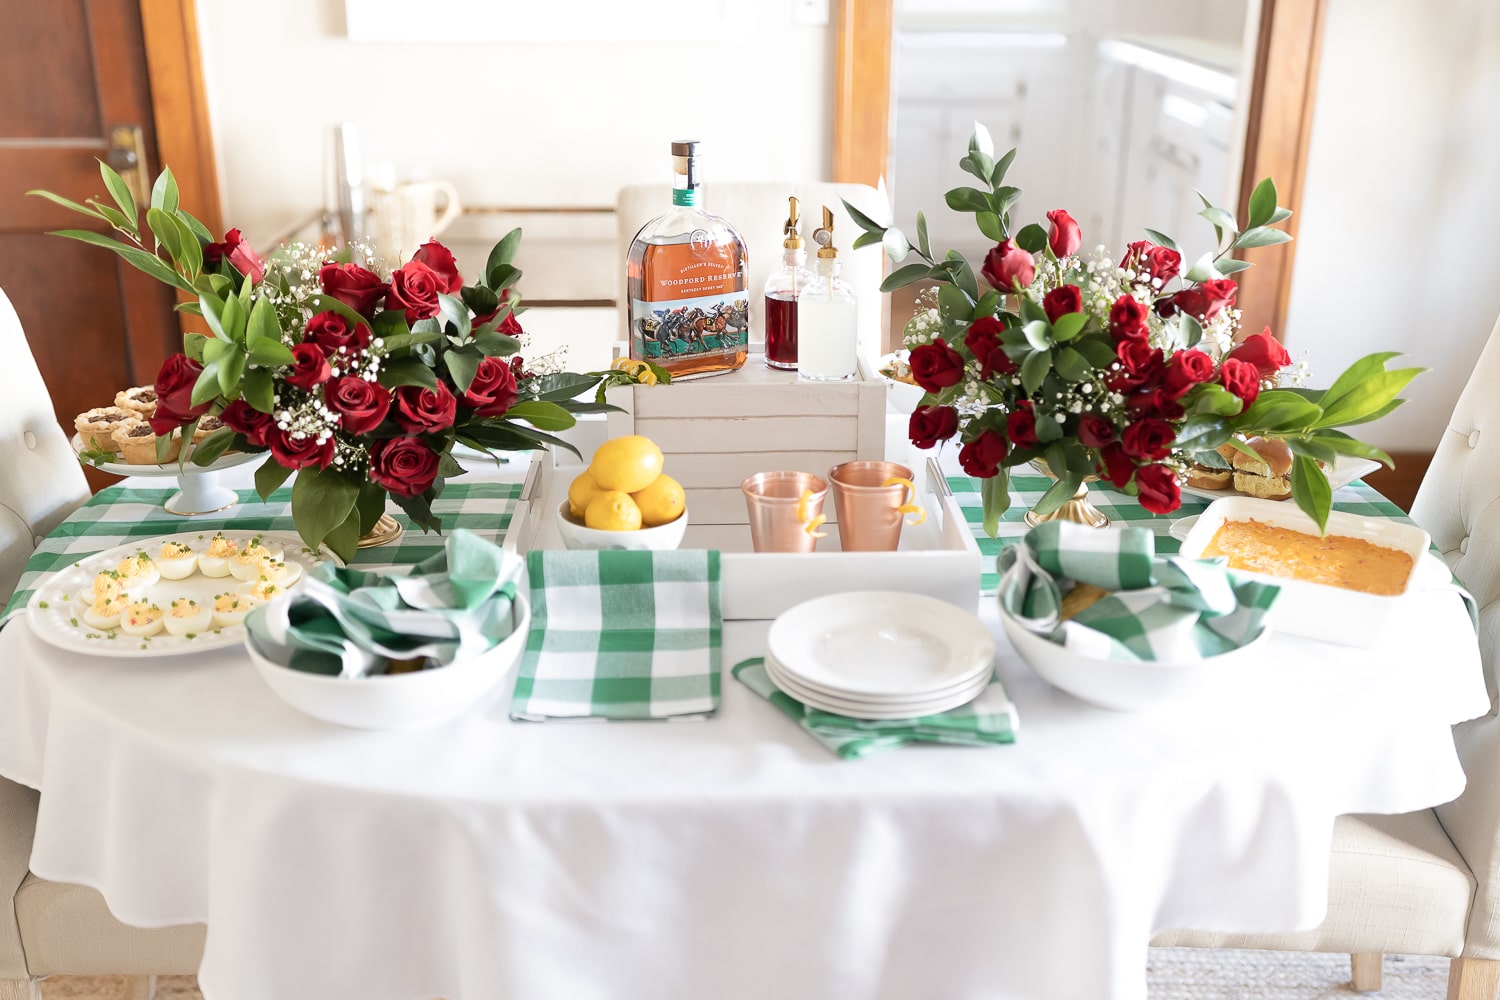 Kentucky Derby party food prepared by southern entertaining blogger Stephanie Ziajka on Diary of a Debutante